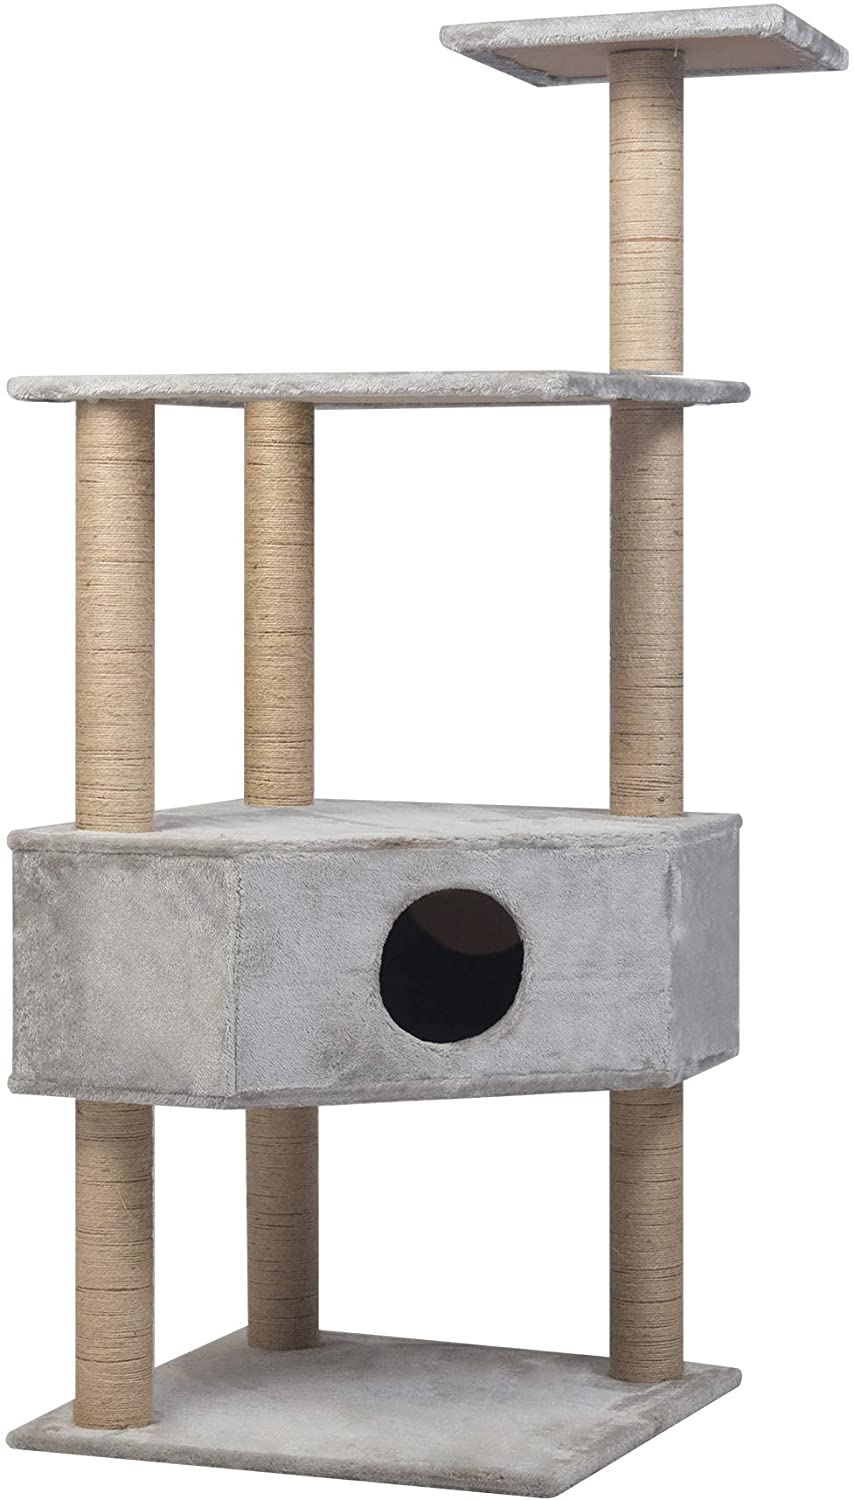 Condo Pet Furniture Multi-Level Kitten Activity Tower Play House with Sisal Scratching Posts Perch (Style 8)